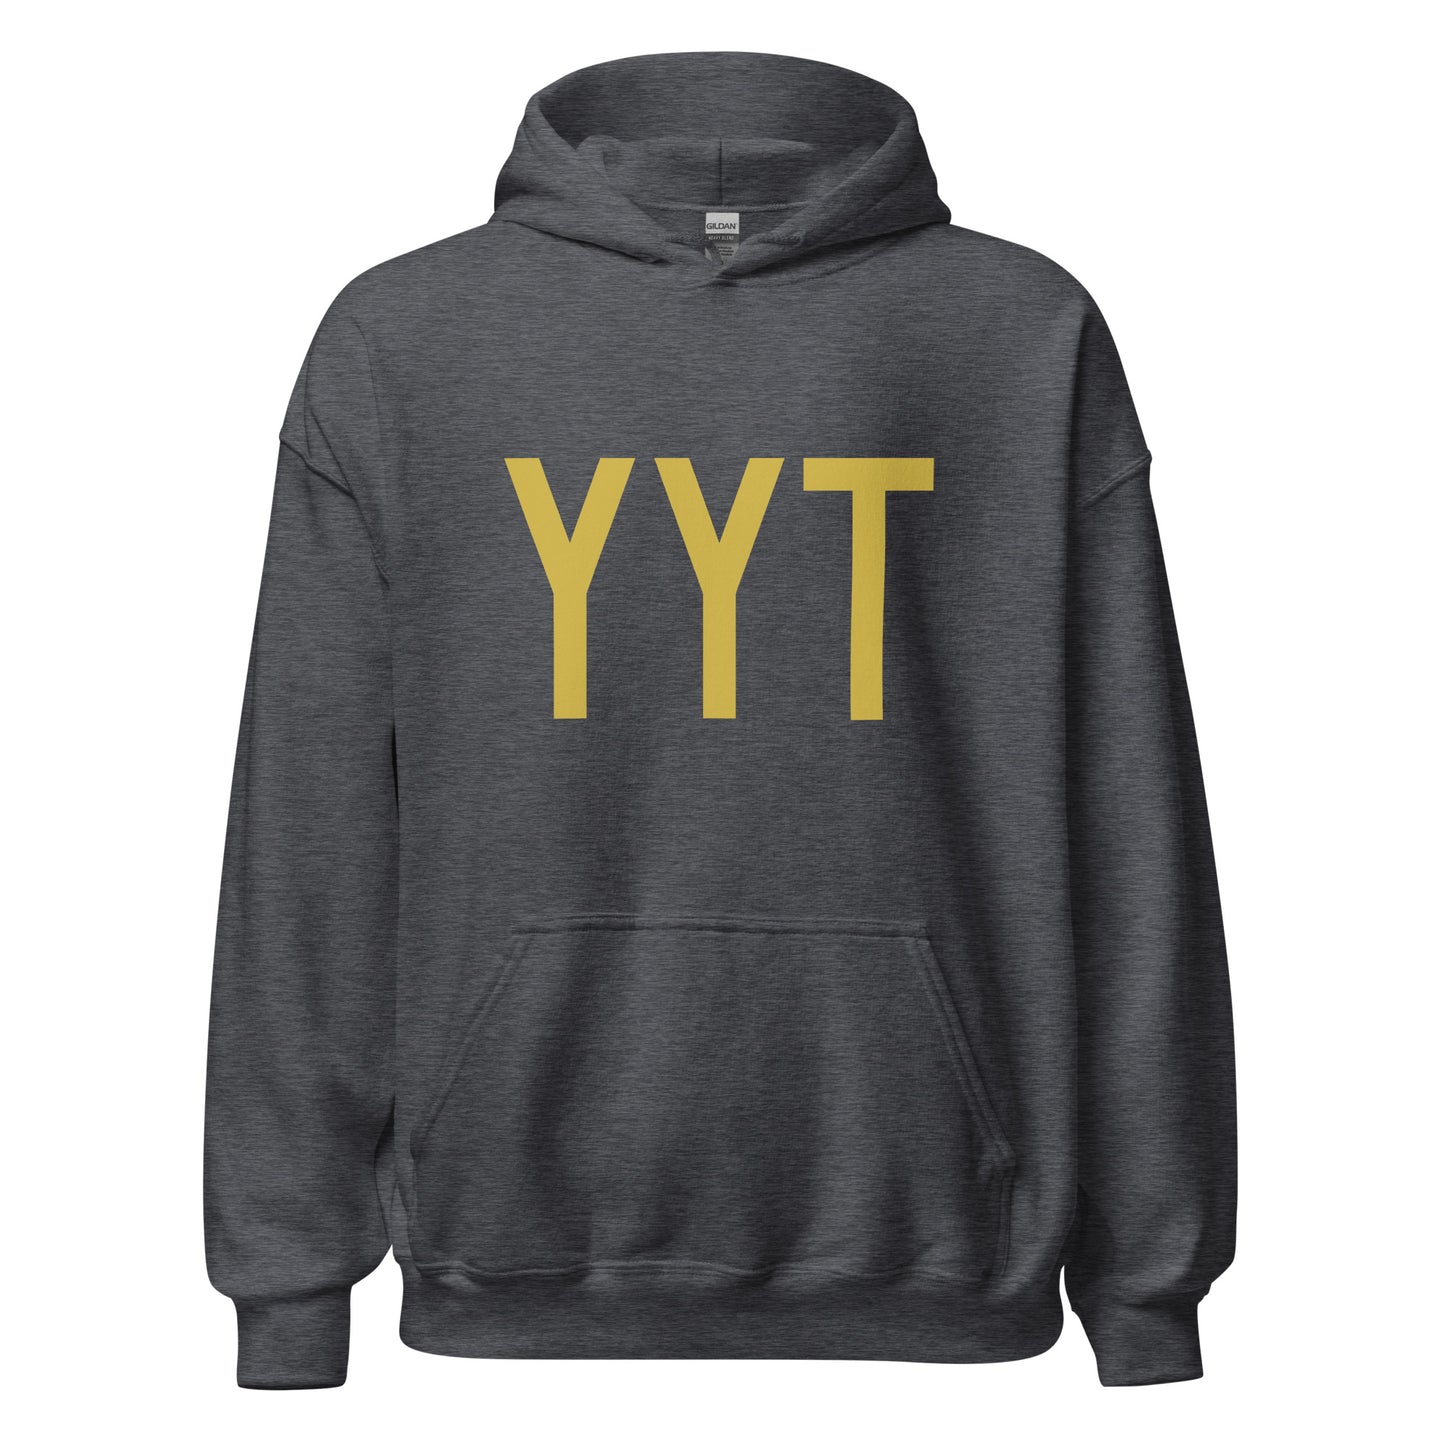 Aviation Gift Unisex Hoodie - Old Gold Graphic • YYT St. John's • YHM Designs - Image 03